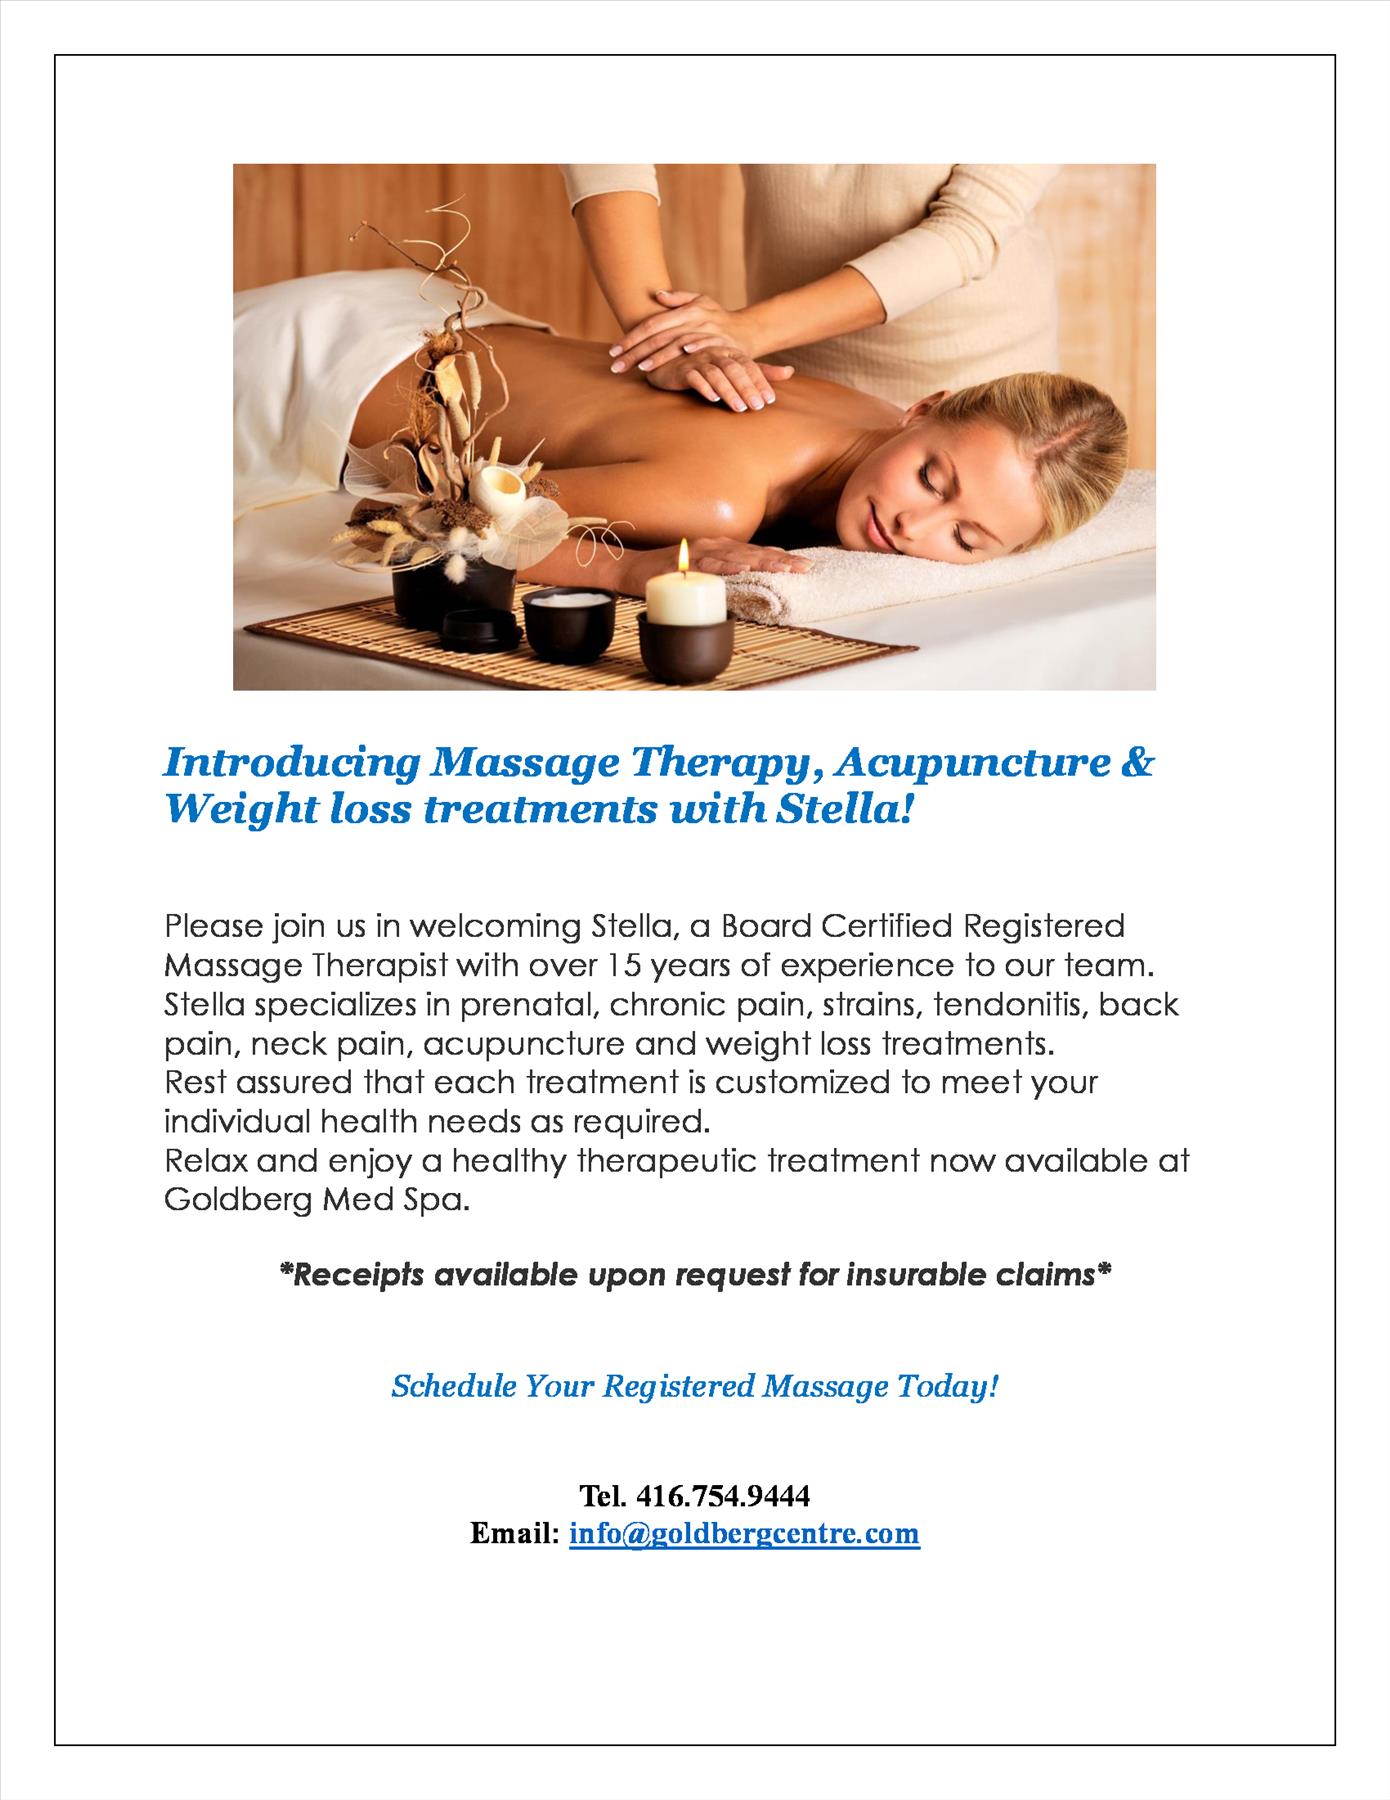 Best Massage Therapy,  Acupuncture  & Weight Loss Treatments - Toronto